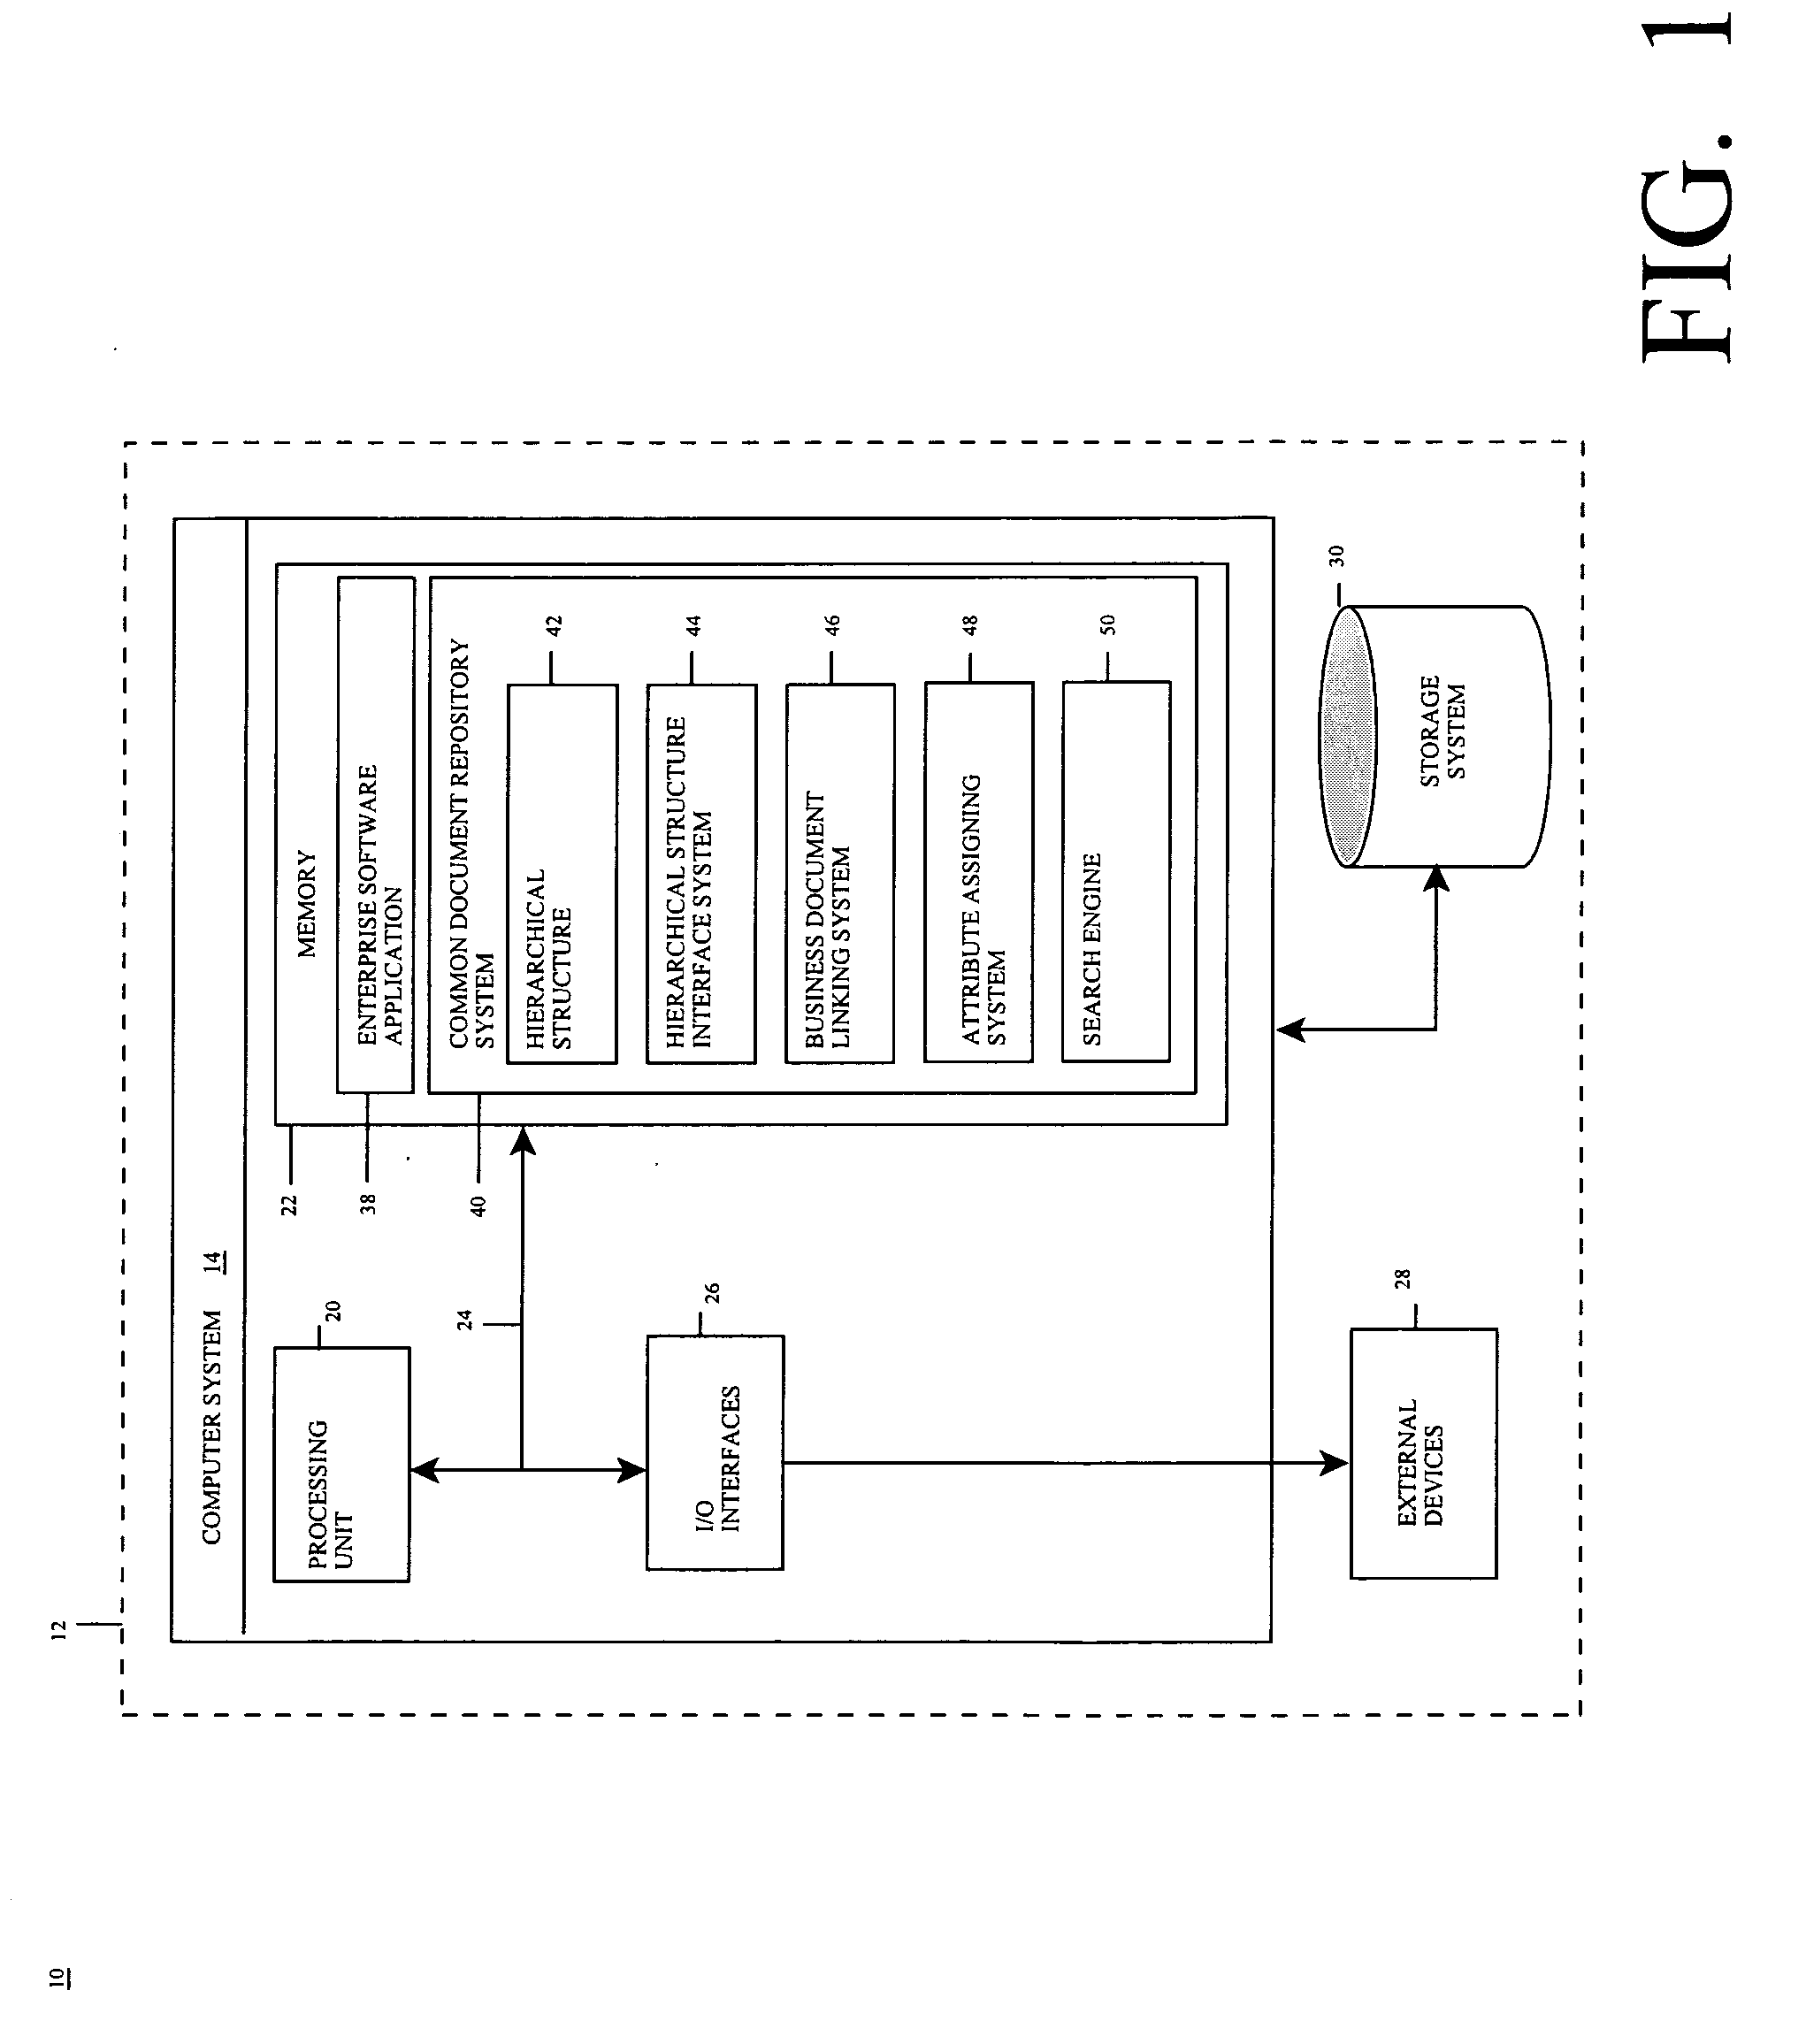 Computer-implemented method, tool, and program product for storing a business document in an enterprise software application environment